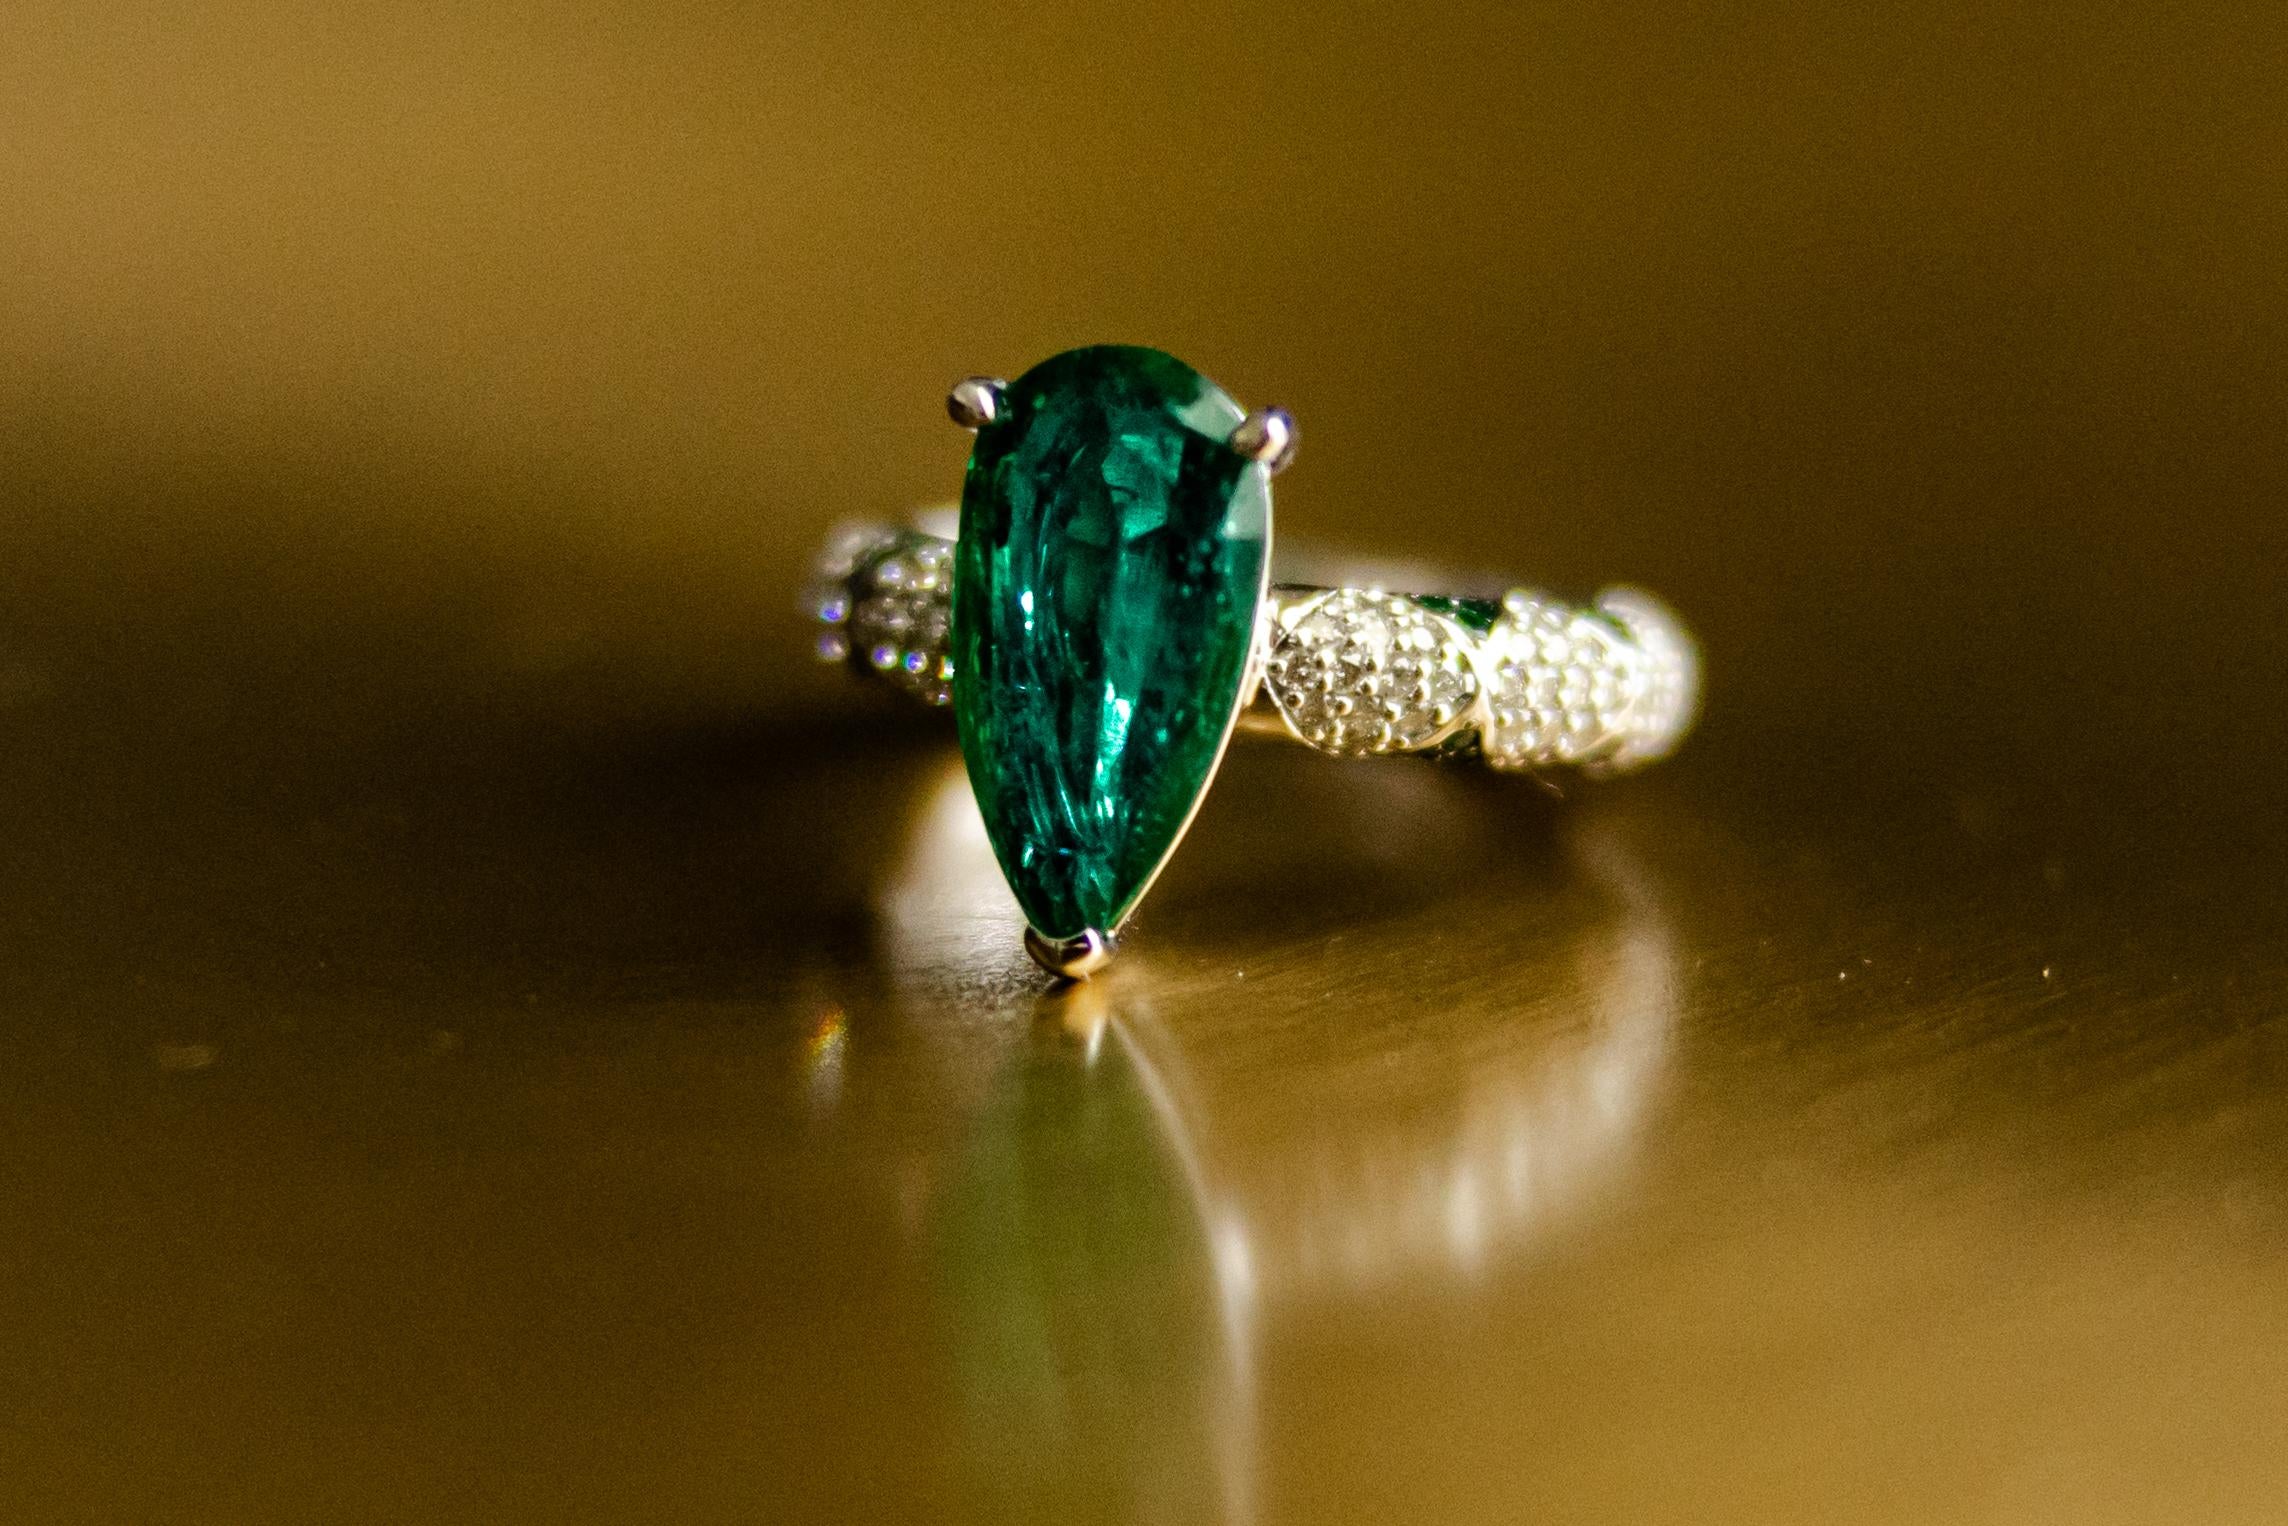 ONE OF A KIND Significant emerald cut Emerald solitaire set in Ri Noor’s iconic lotus motif rings. This statement ring features an emerald solitaire set with emerald petals in a lotus motif and pave set brilliant cut diamonds. Wear it alone as an